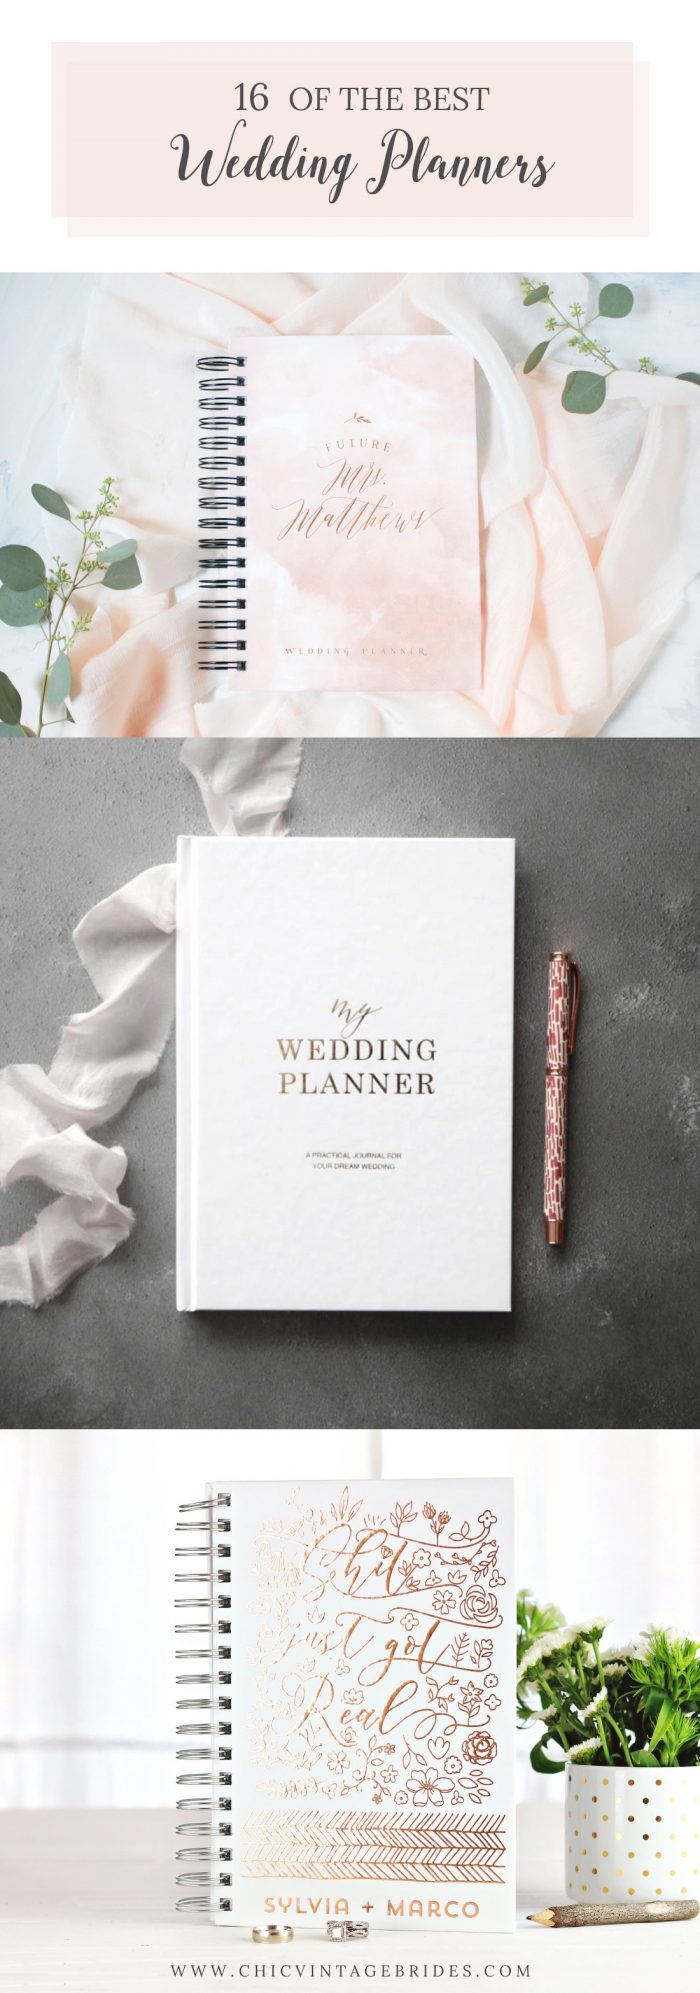 16 of the Best Wedding Planners to Buy